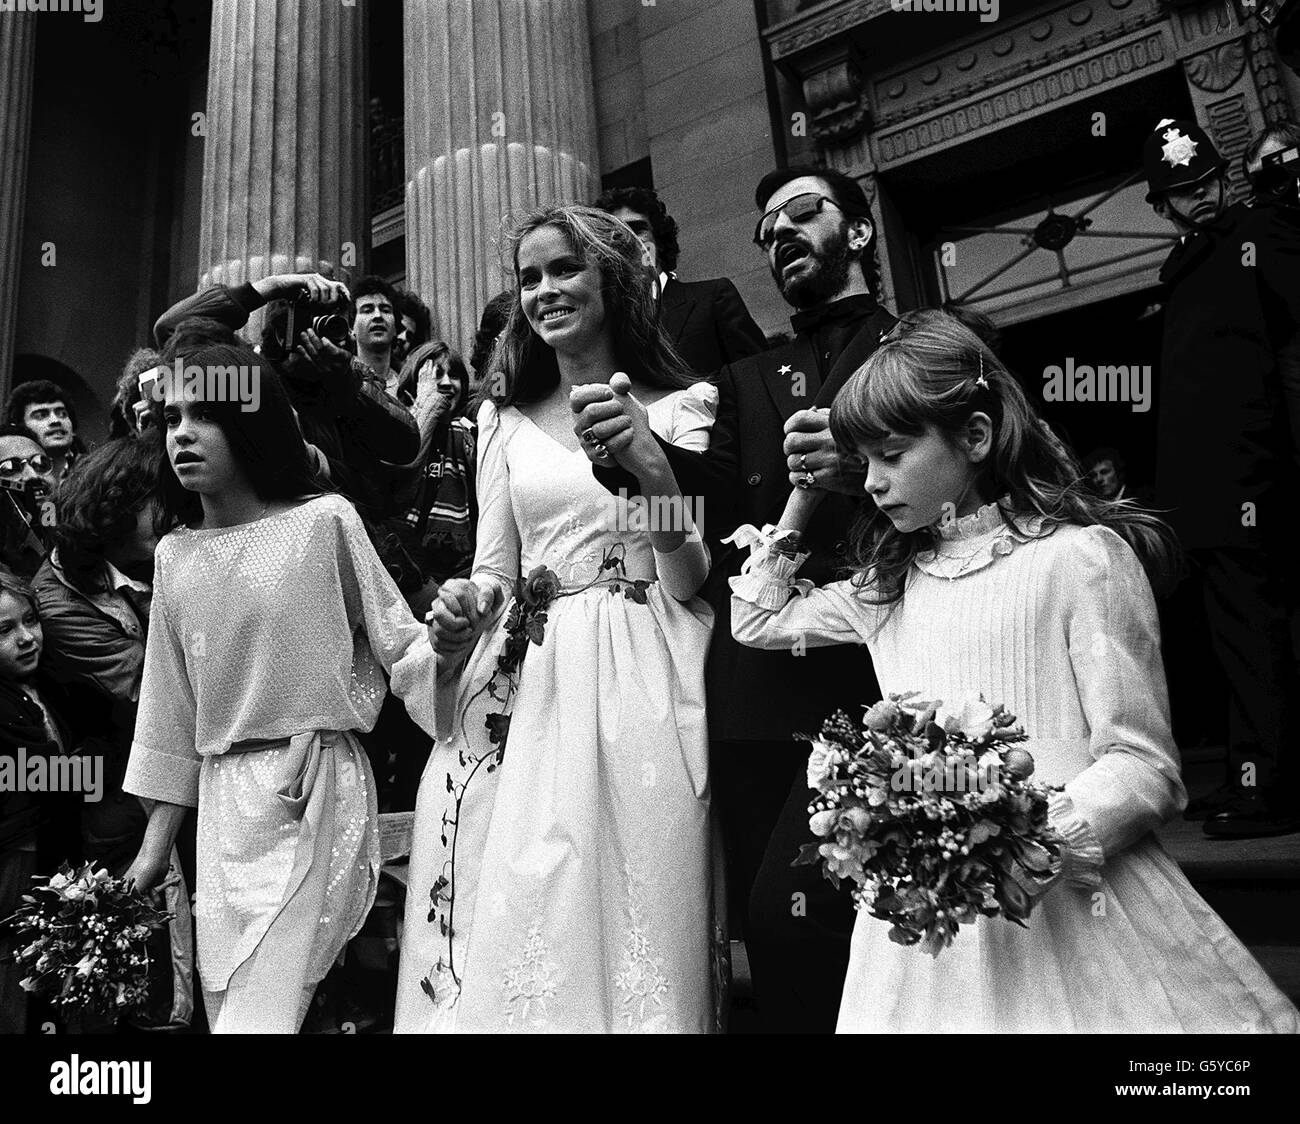 Flanked by bridal attendants former Beatle Ringo Starr, 41, leaves Marylebone Register Office with his bride actress Barbara Bach, 30. Stock Photo